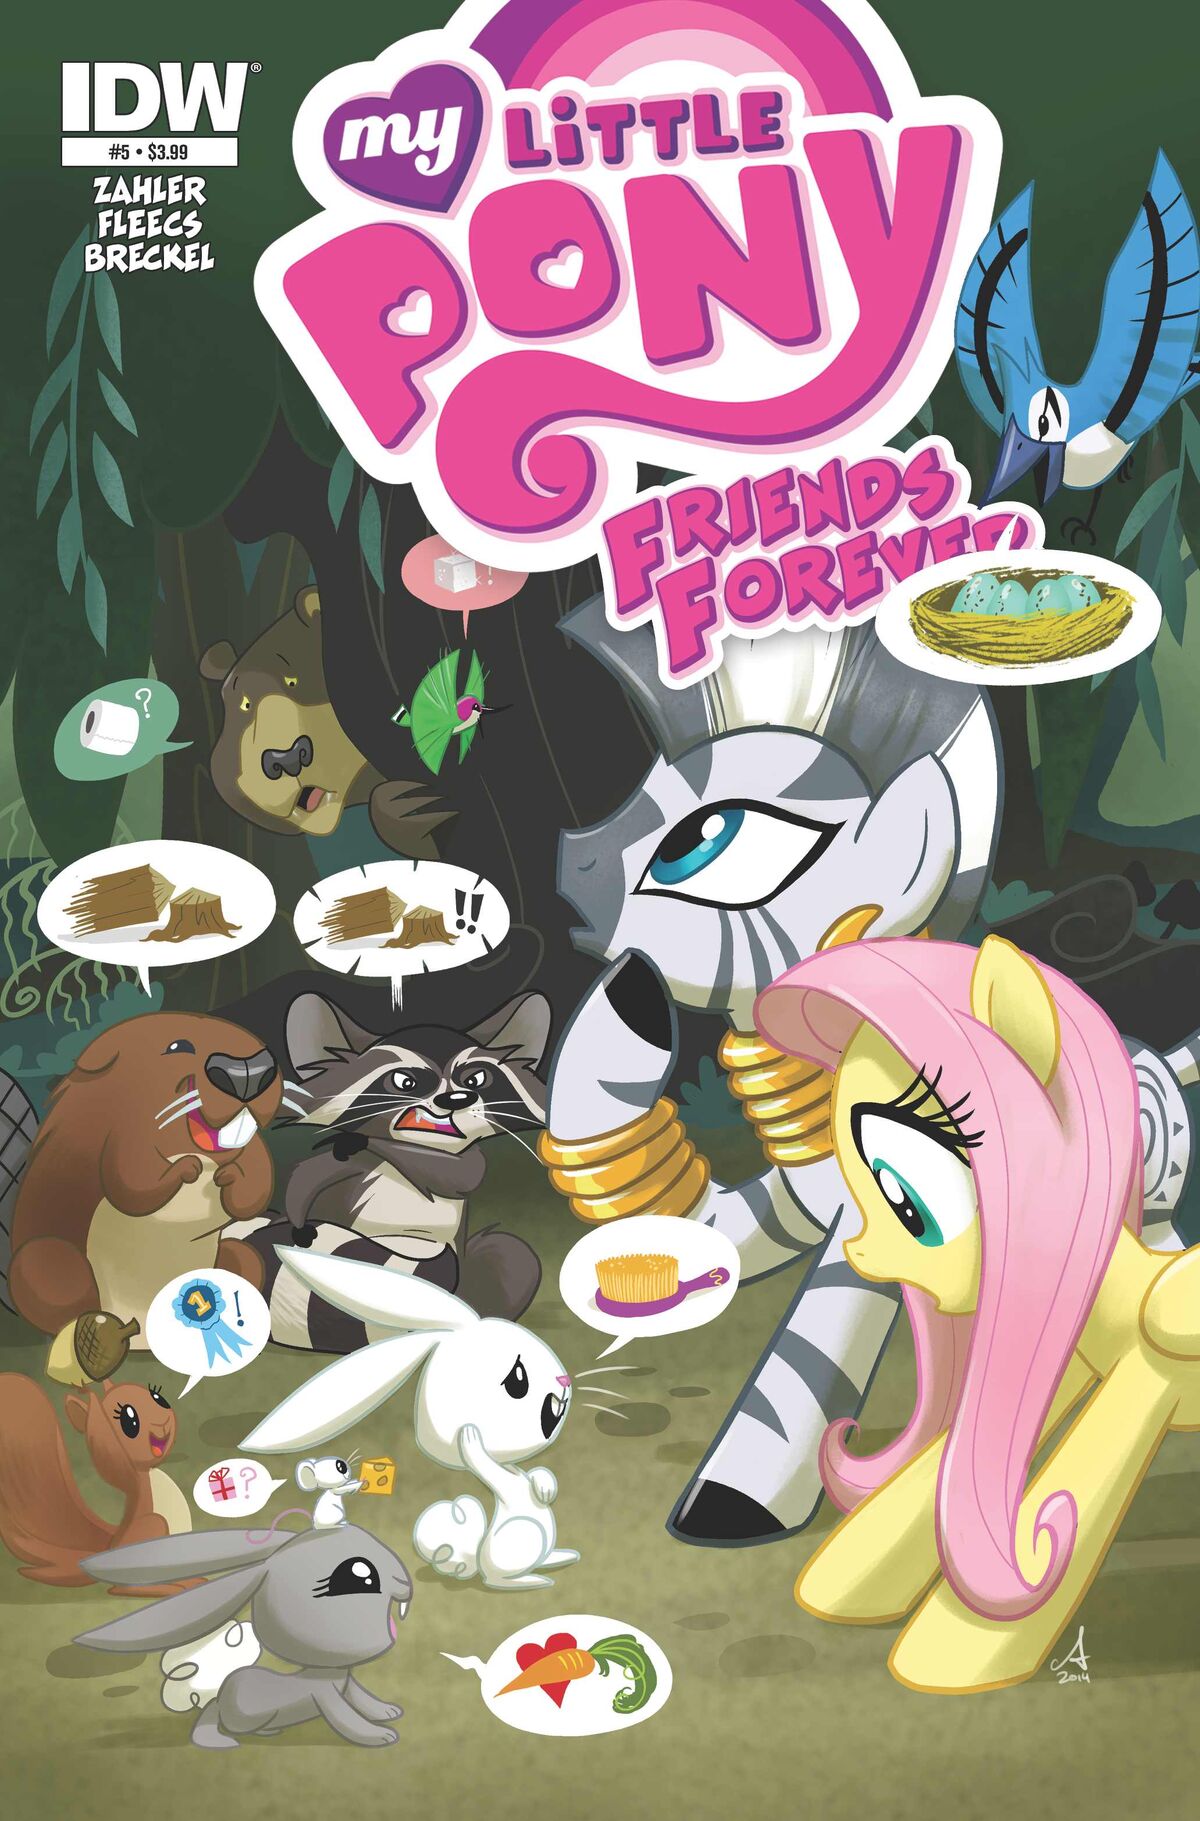 Friends Forever Issue 5 | My Little Pony Friendship is Magic Wiki 